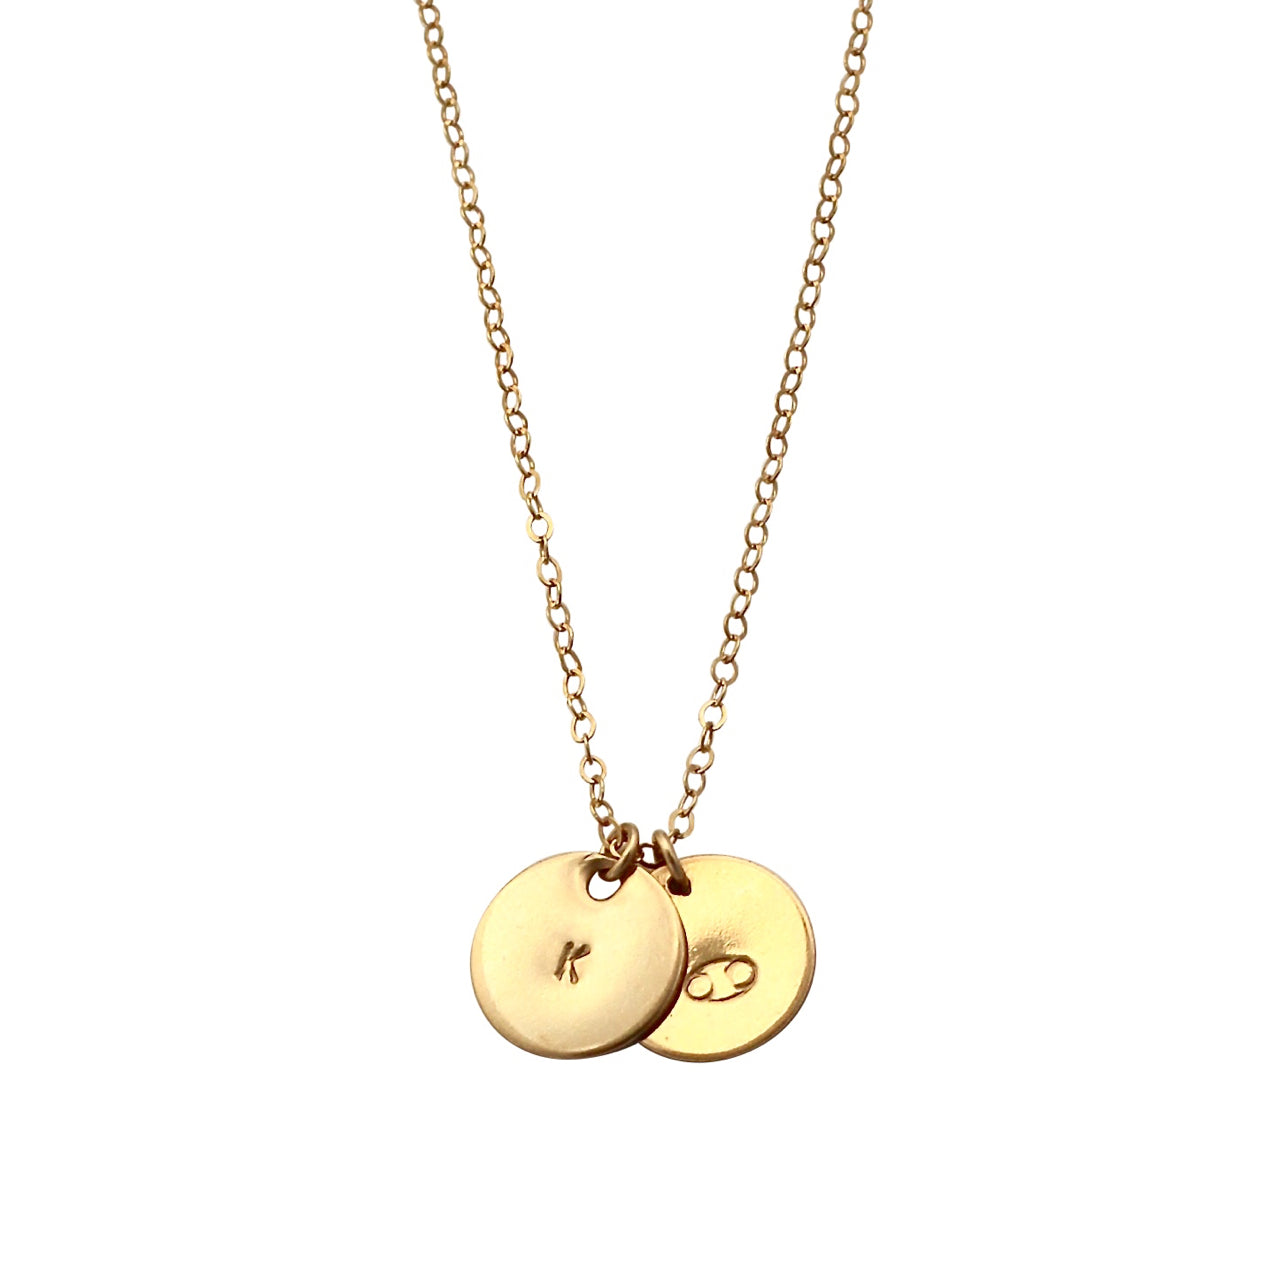 Gold Initial This necklace with two discs